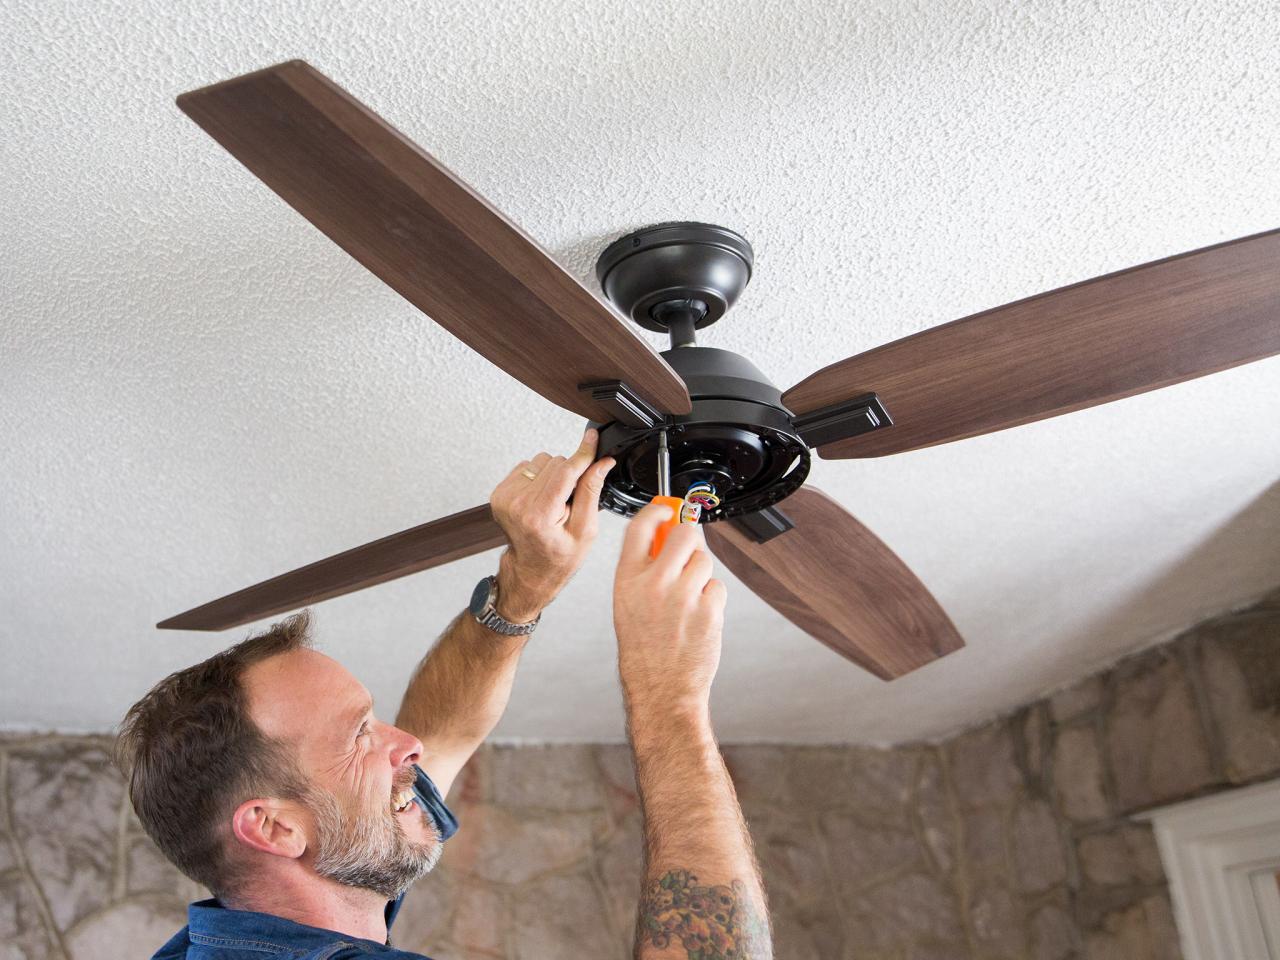 How To Fix A Ceiling Fan How to Install a Ceiling Fan | HGTV